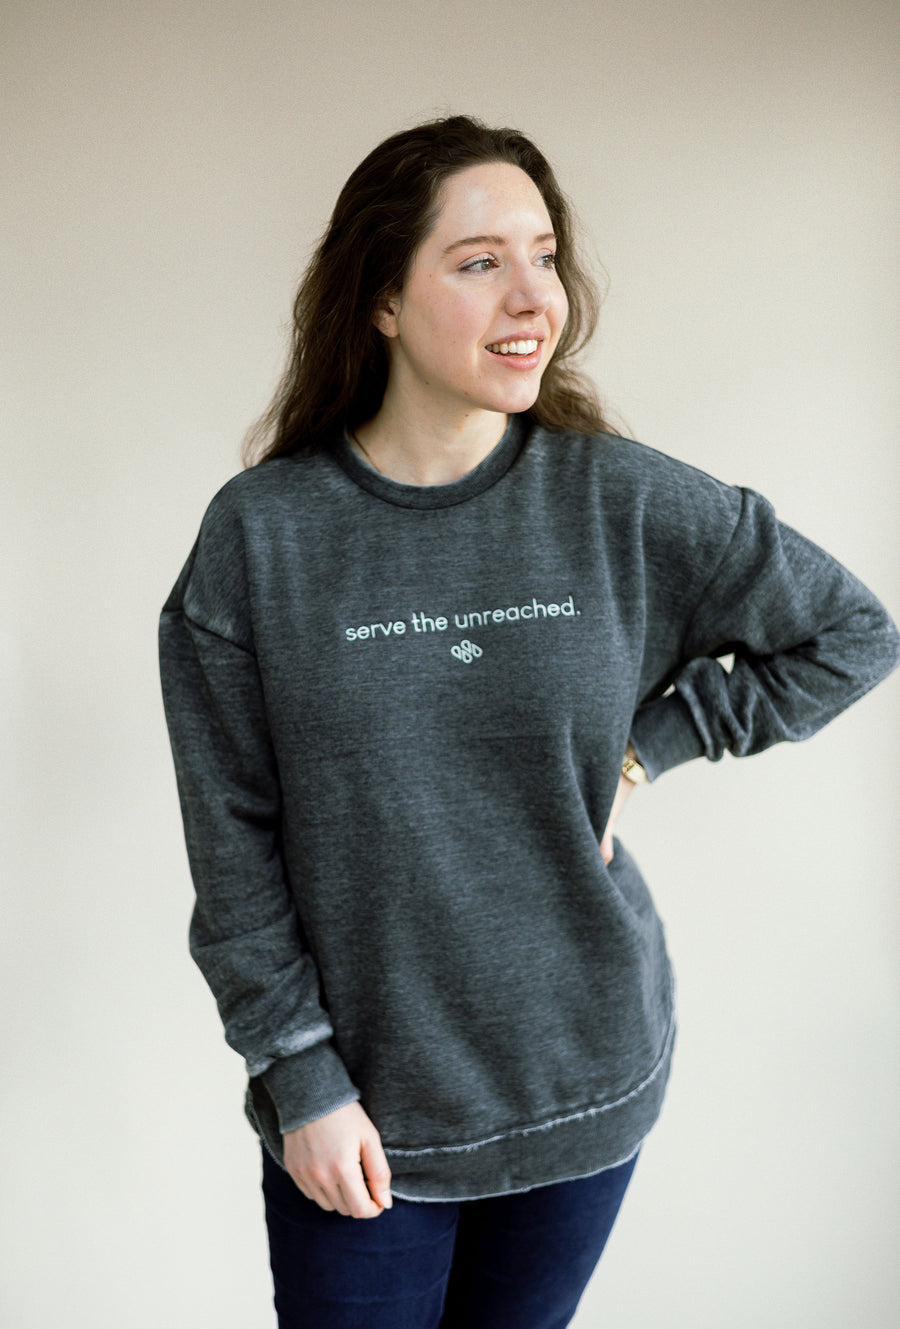 Serve the Unreached Embroidered Sweatshirt